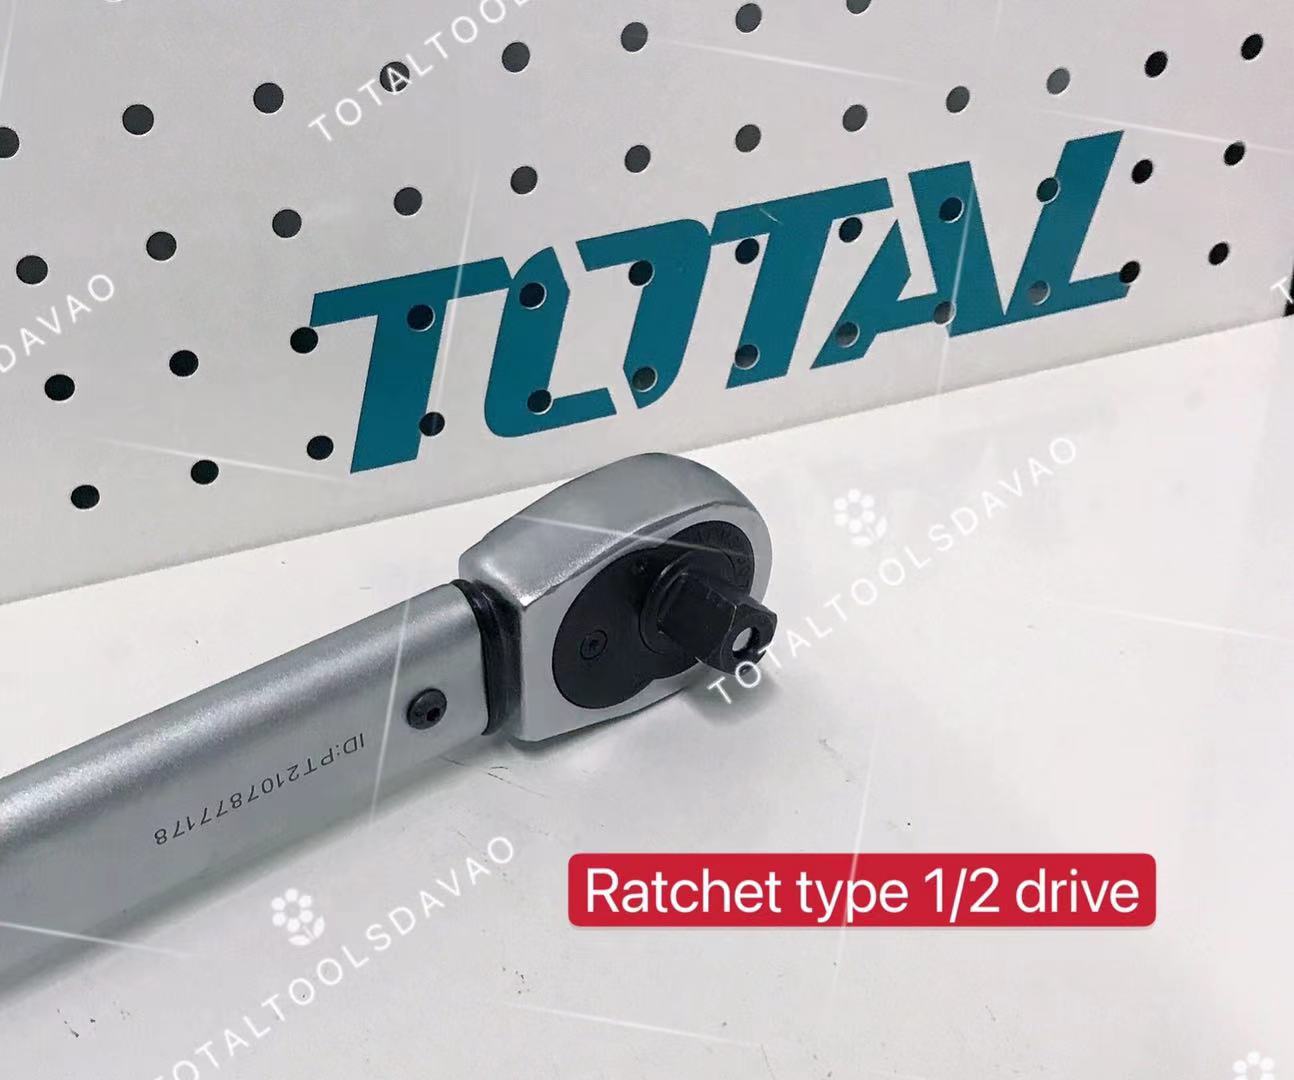 TOTAL Torque Wrench 1/2 (THPTW200N2)